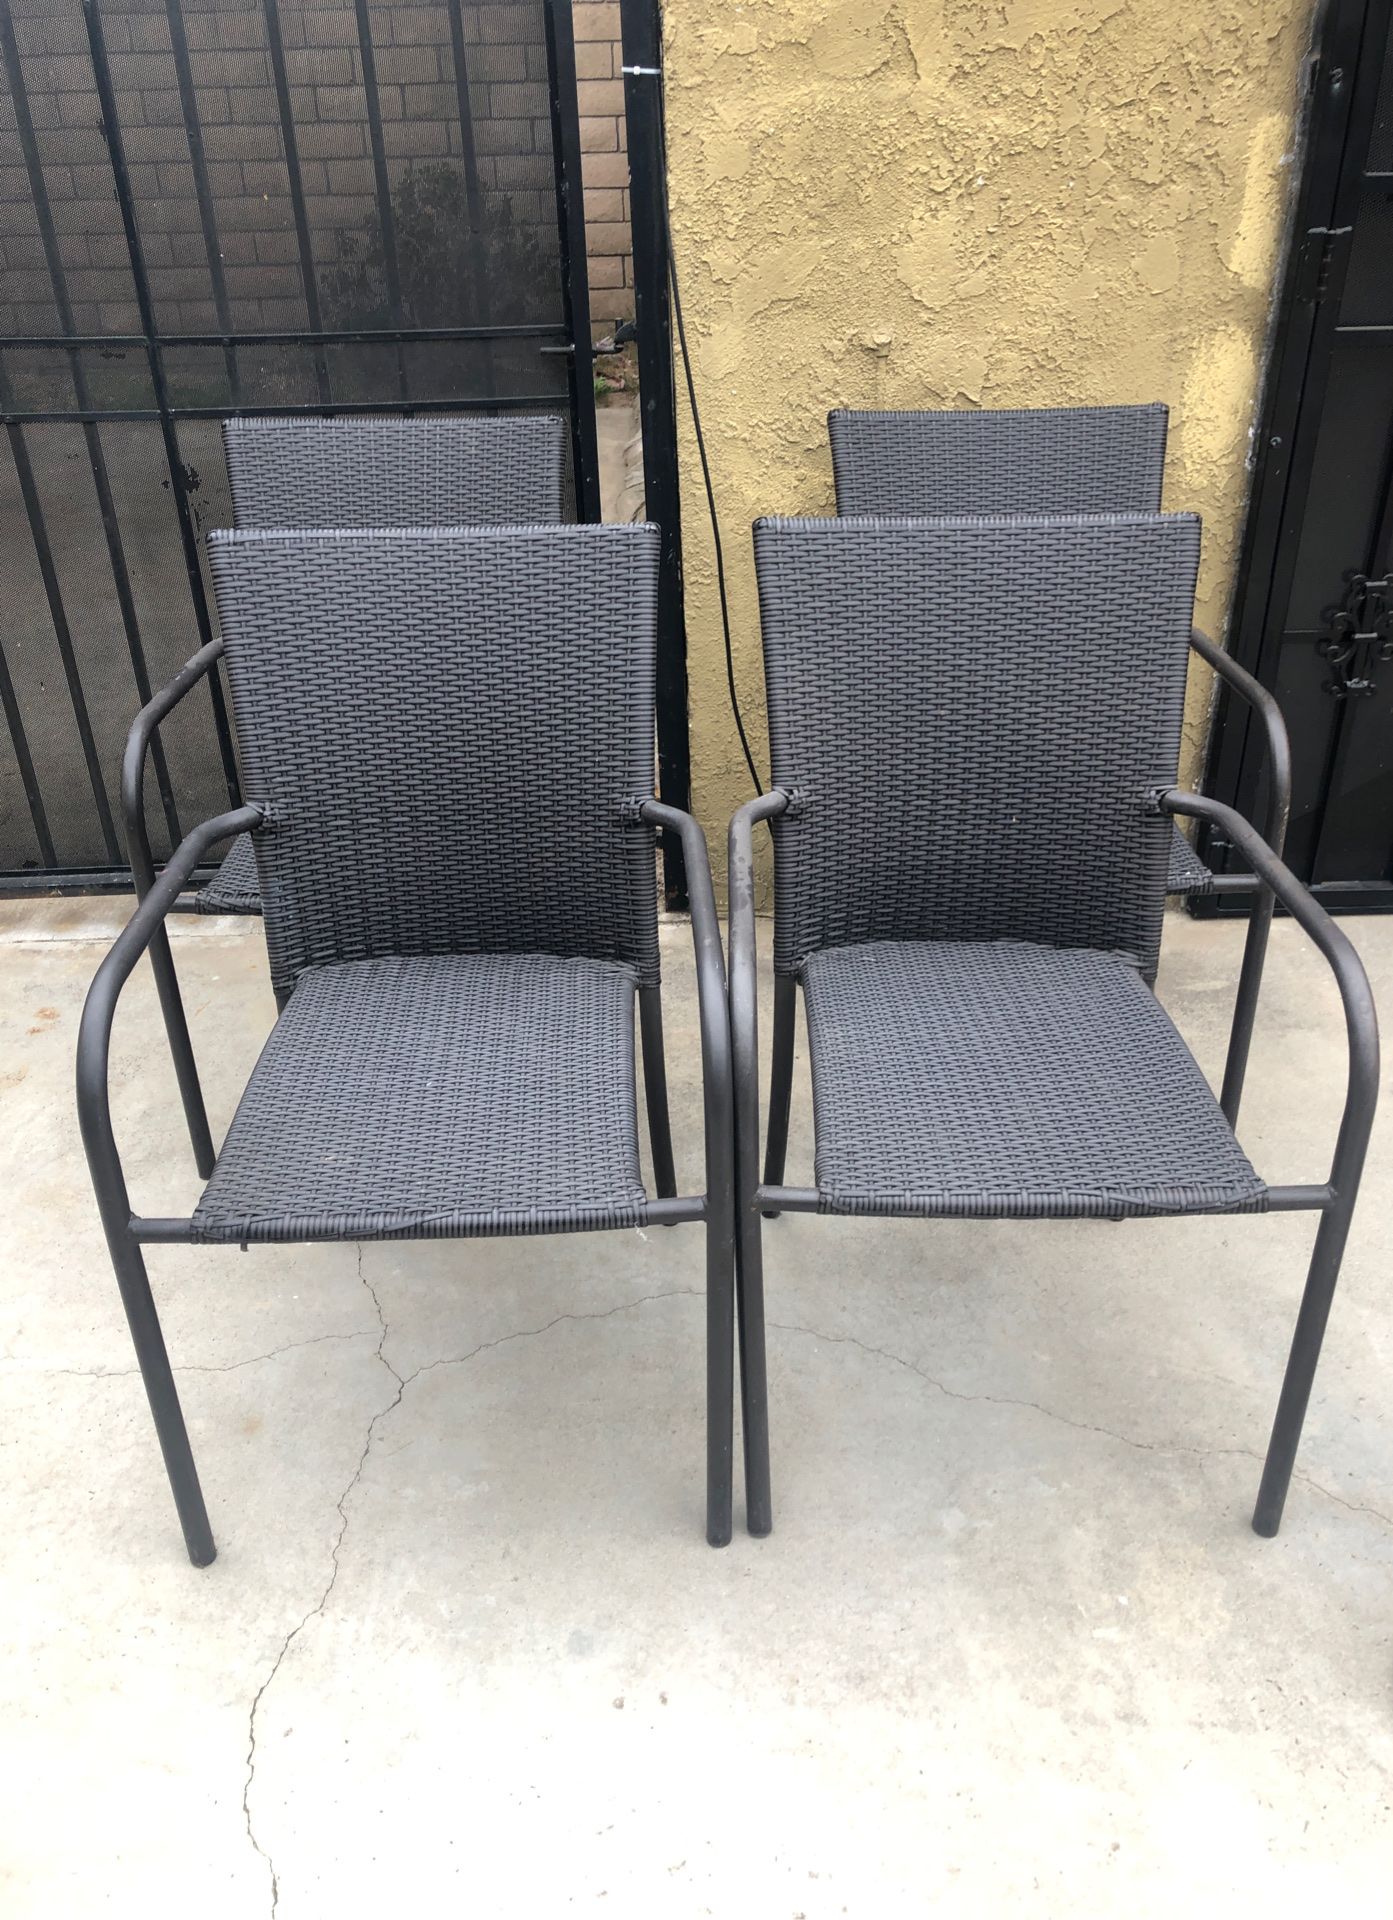 Large wicker patio chairs